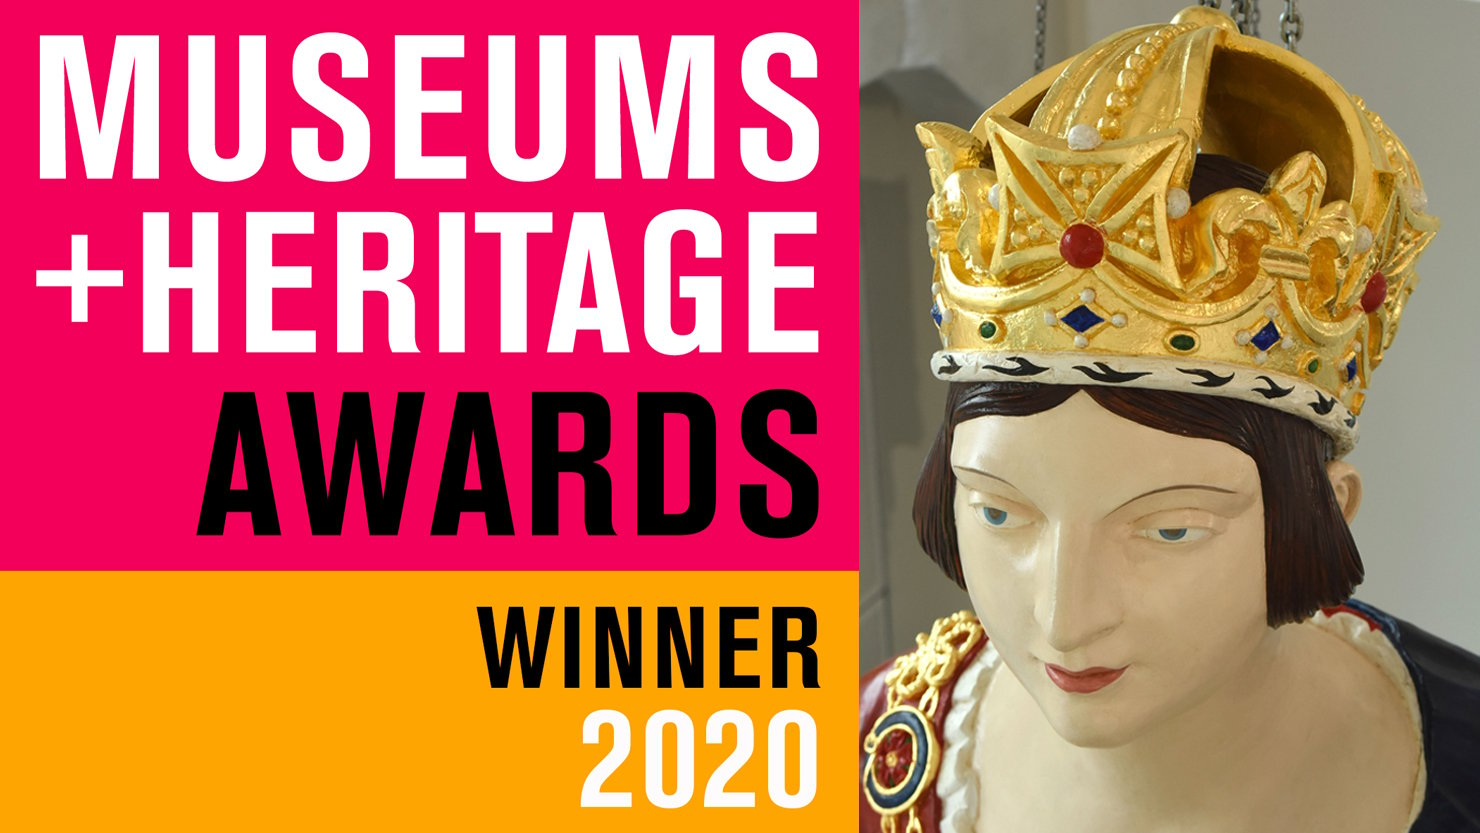 Ground breaking figureheads project wins national award